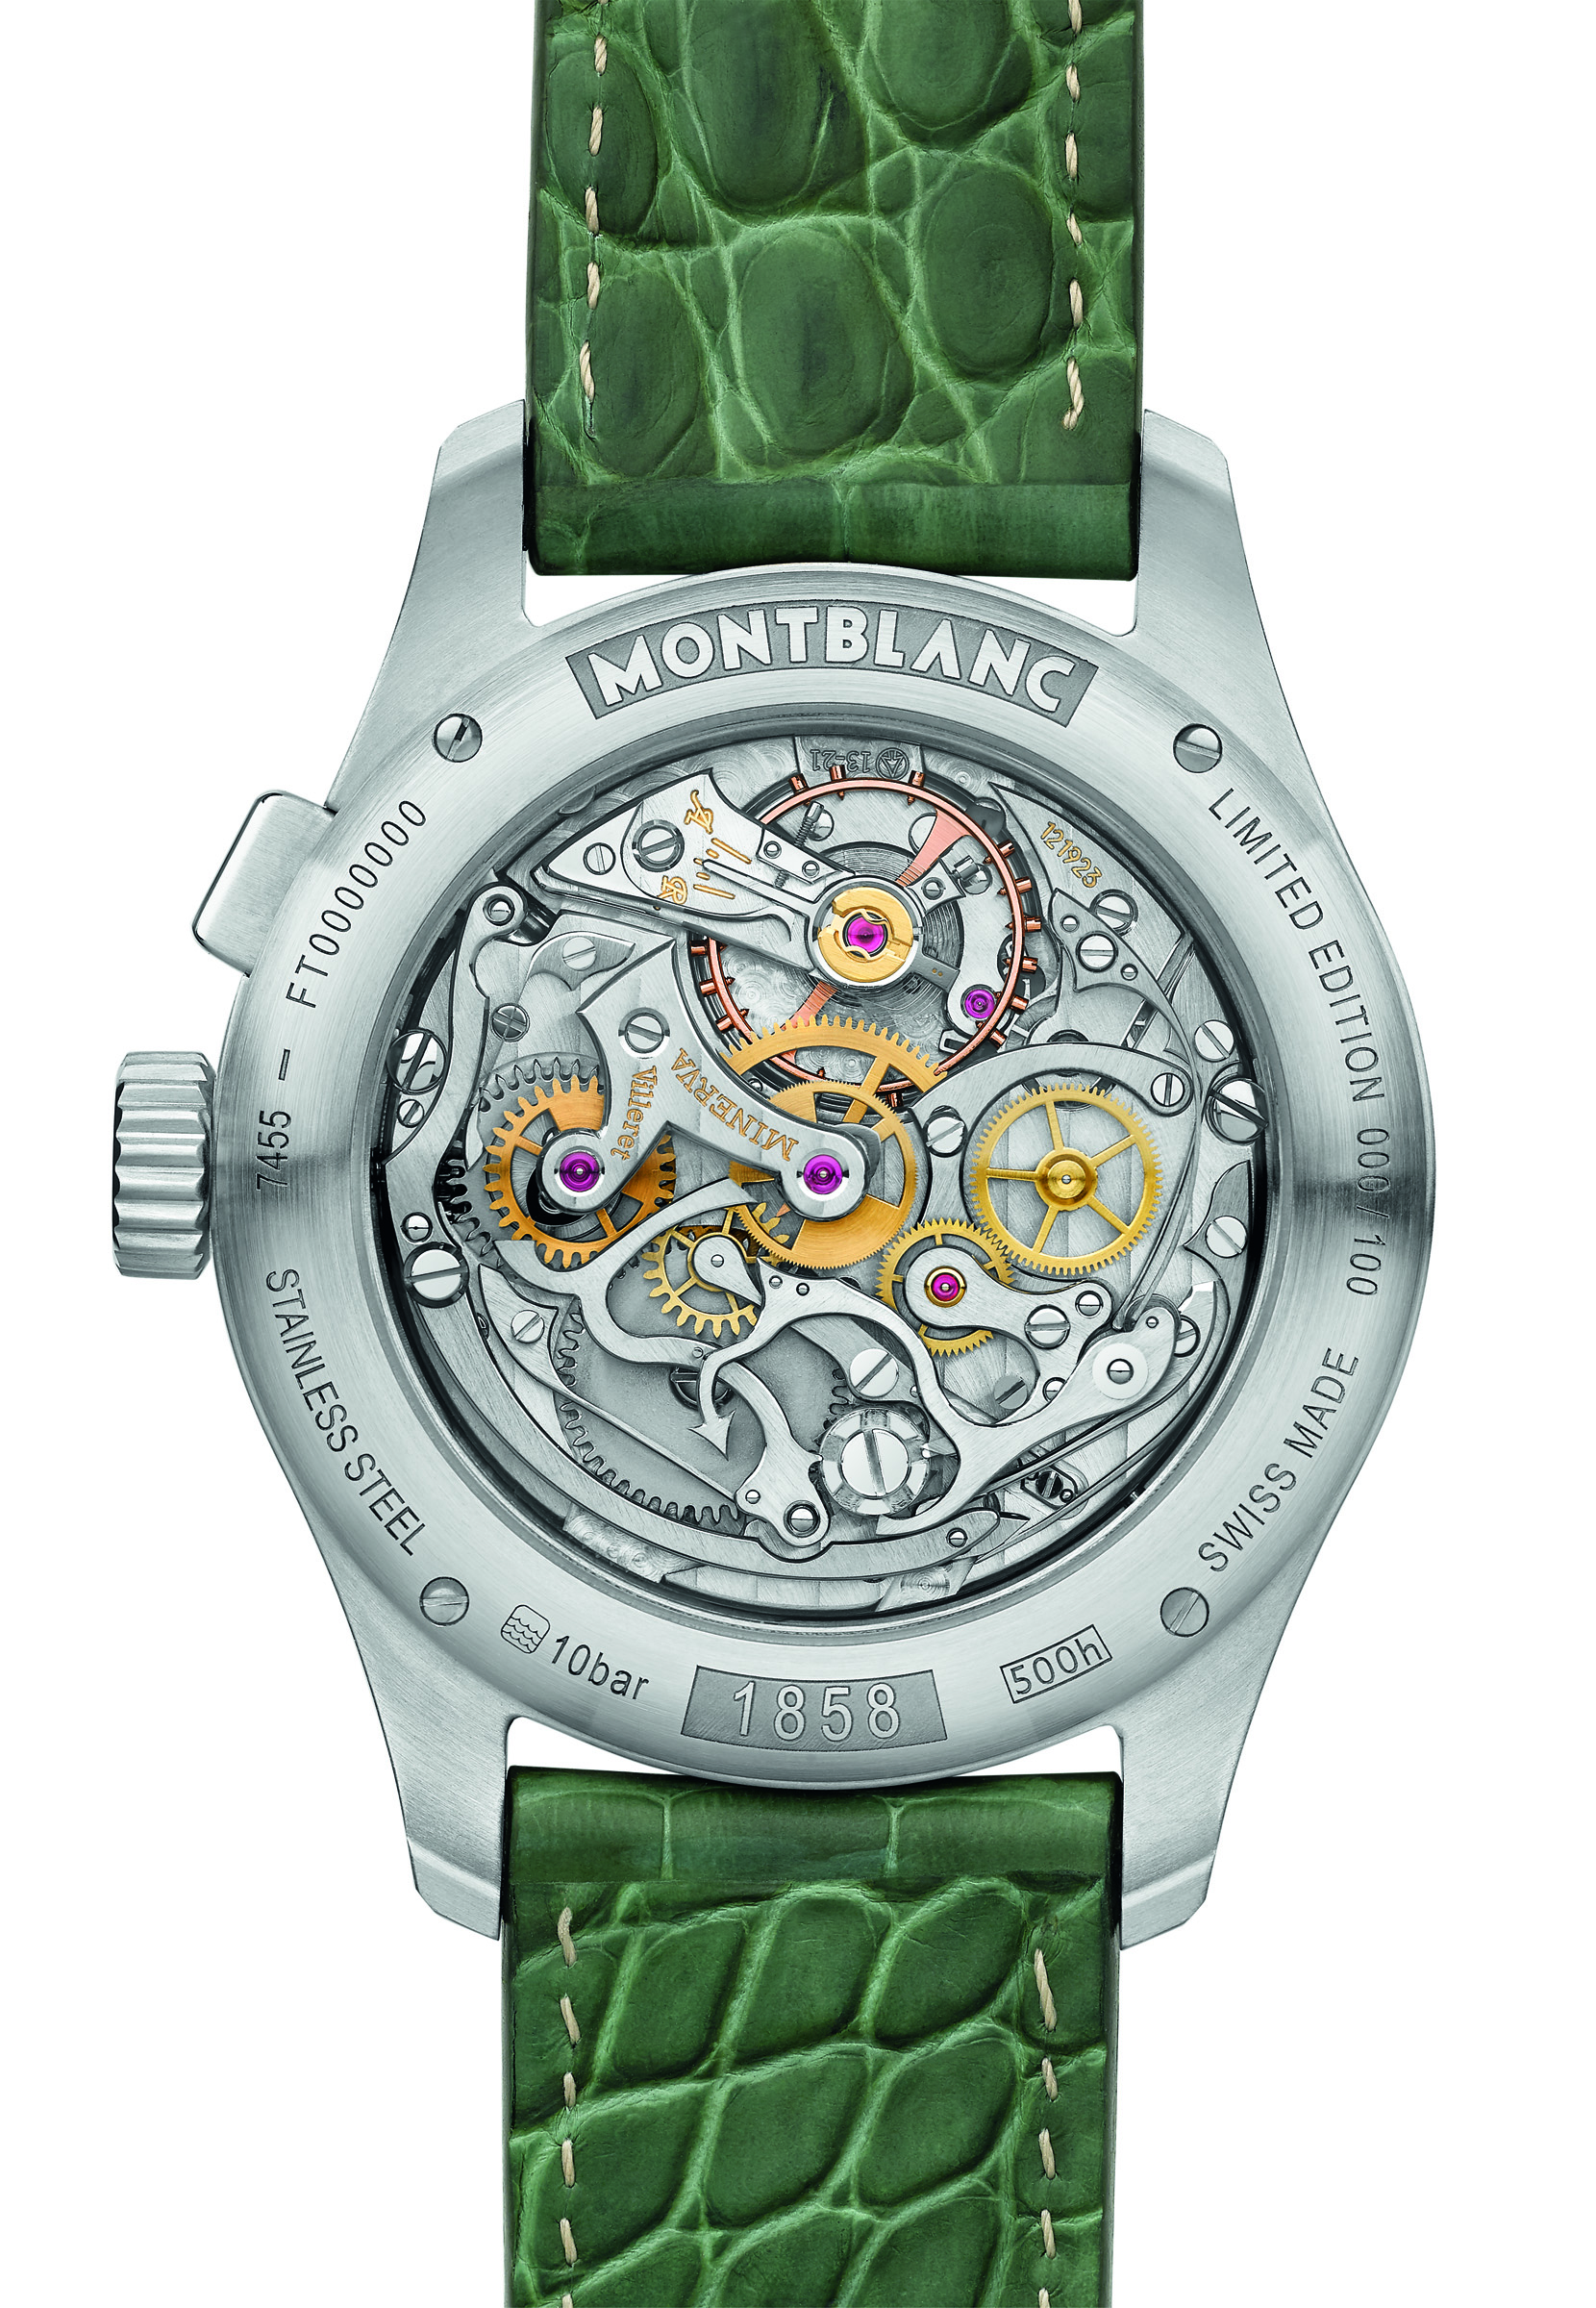 Manufacture monopusher chronograph Calibre MB M13.21, composed of a large balance wheel with 18 screws beating at the traditional frequency of 18,000 A/H, a column wheel and horizontal coupling. 